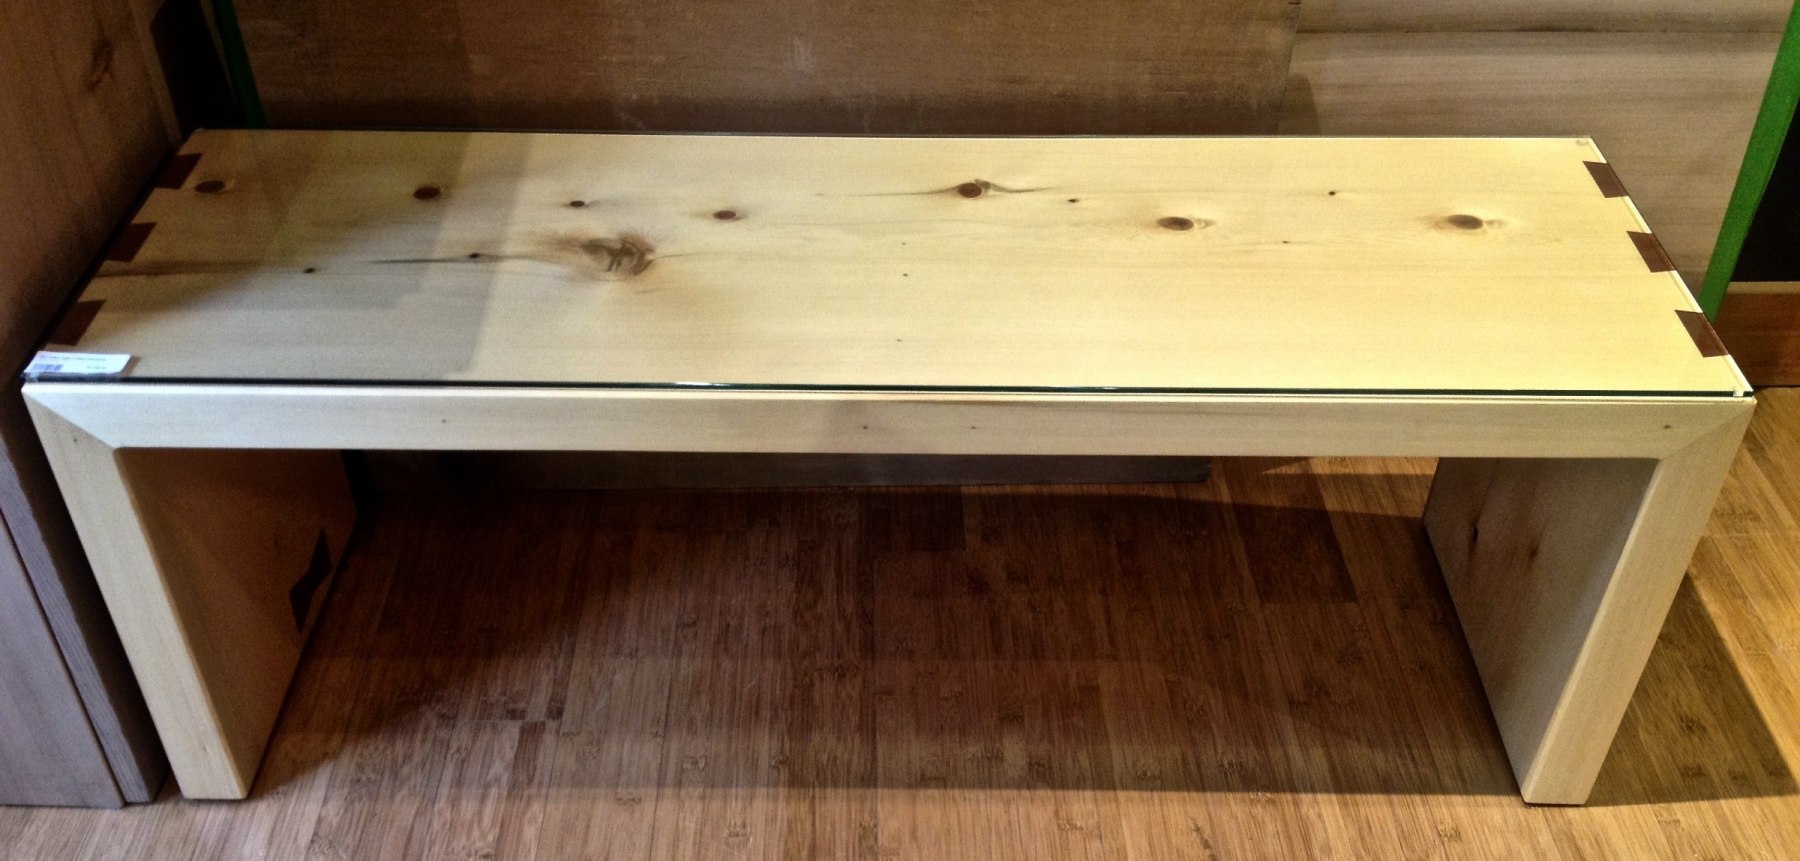 Yellow Cedar Coffee Table Divine Proportions - The work of Robinson Cook